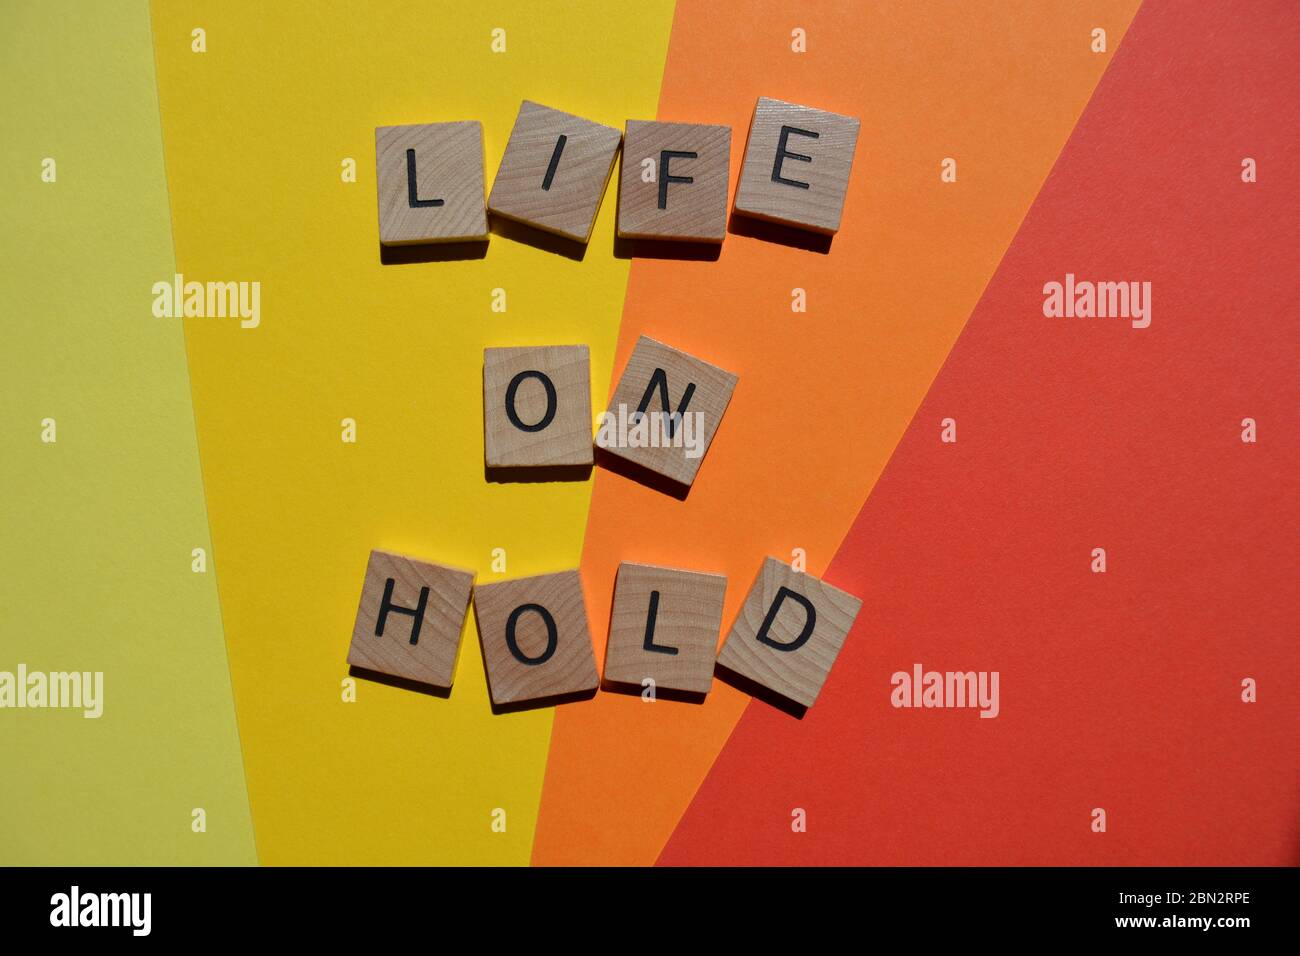 Life on Hold, words in 3d wooden alphabet letters isolated on colourful background Stock Photo